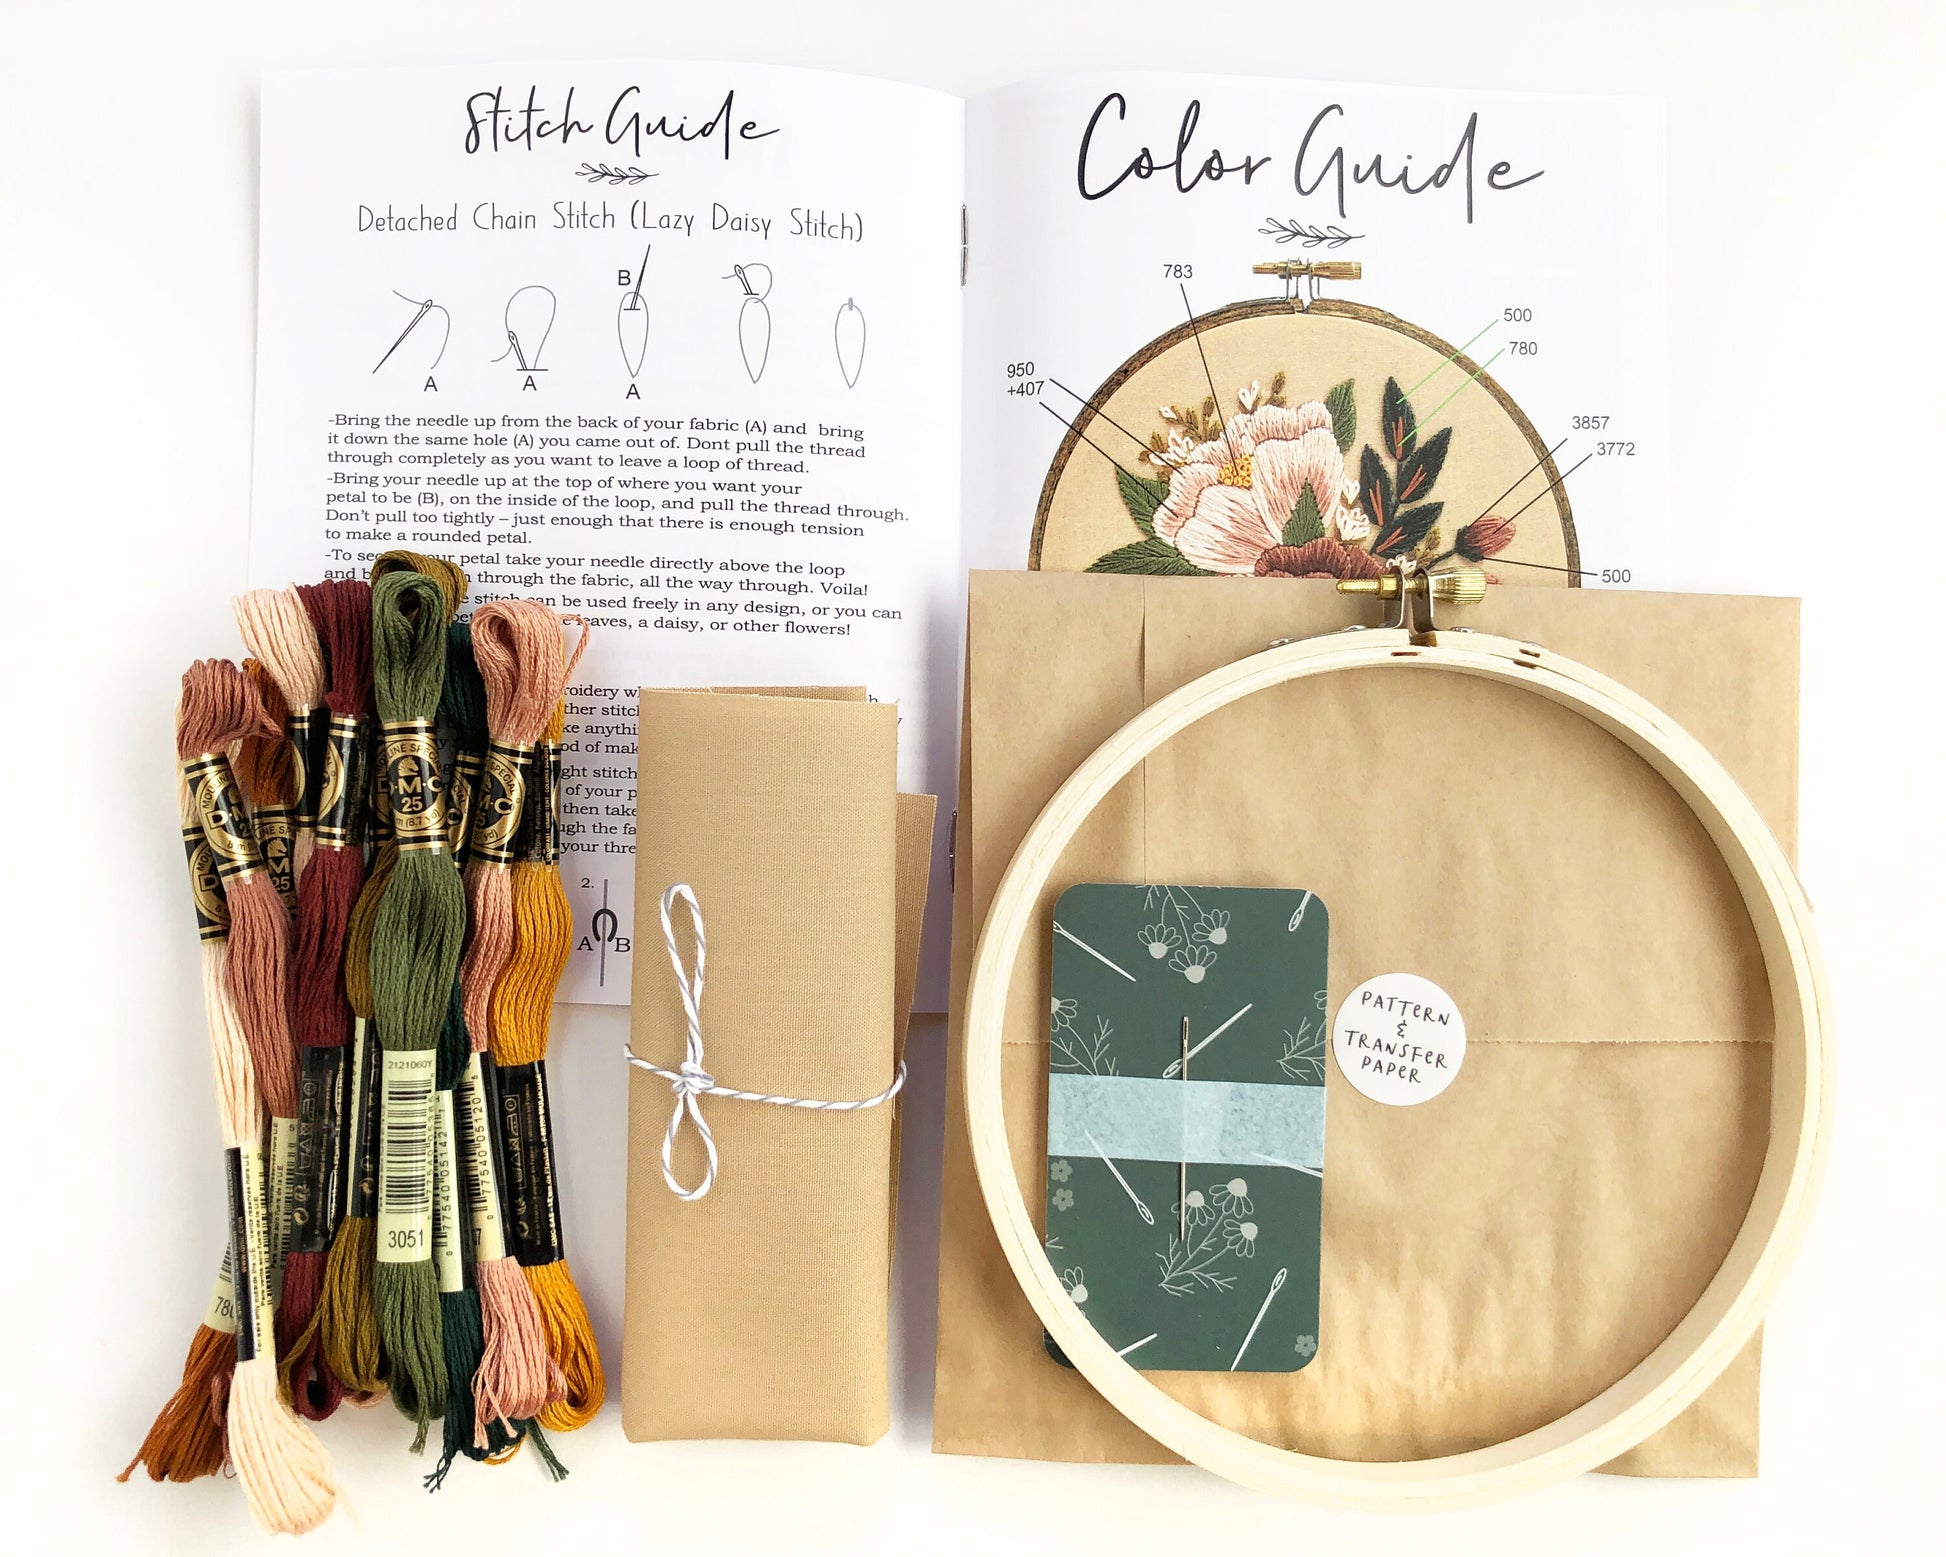 Hand embroidery Kit, Blush Florals Embroidery Kit, DIY embroidery, DIY home decor, embroidery kit, flower embroidery, floral embroidery